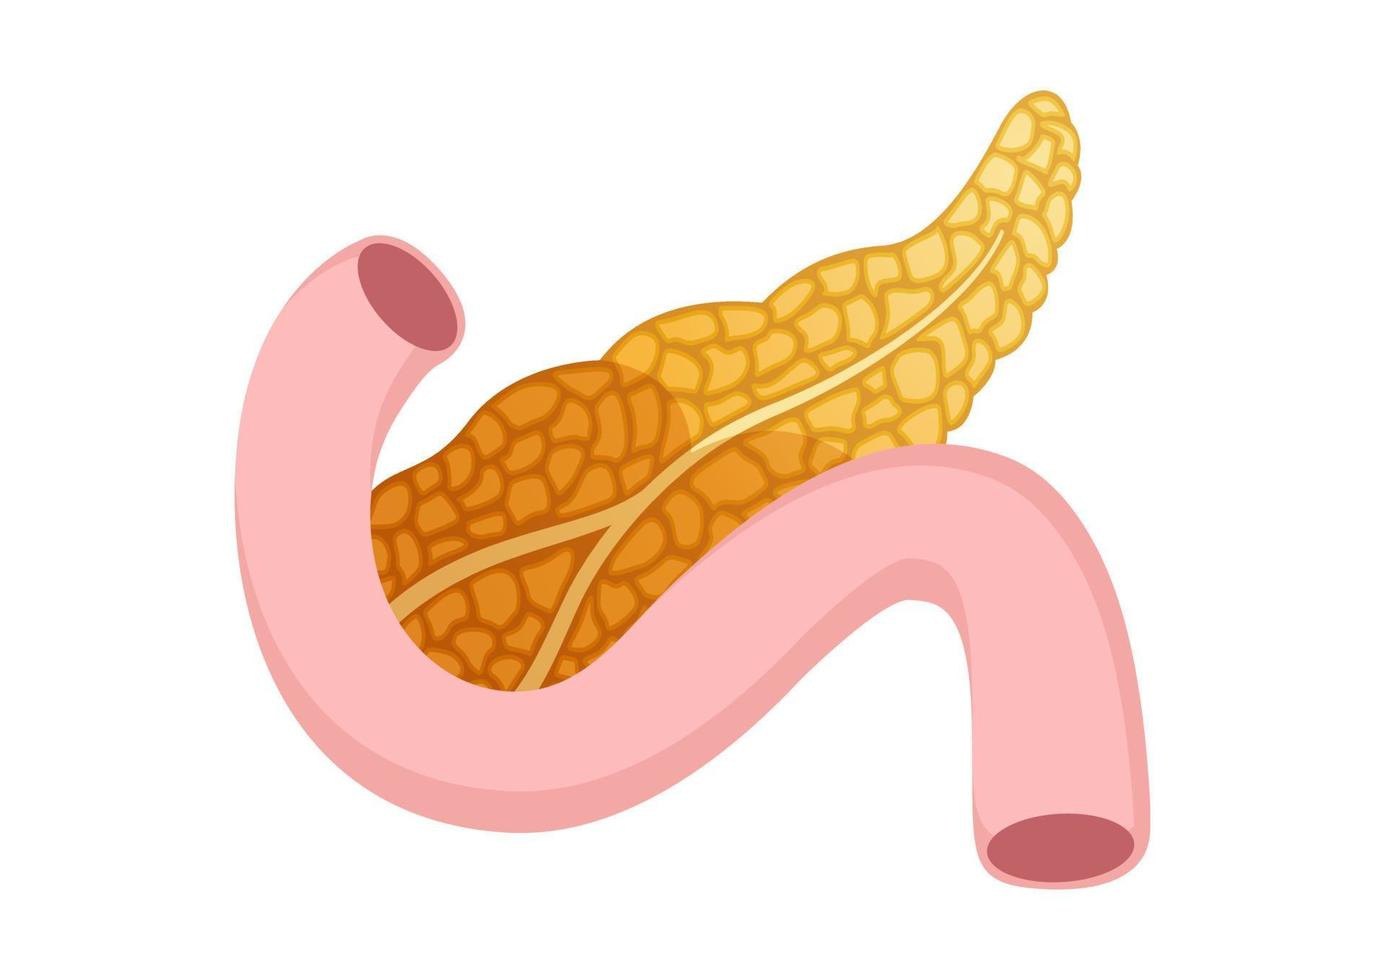 Pancreas icon in cartoon style isolated on white background. Vector design of pancreas